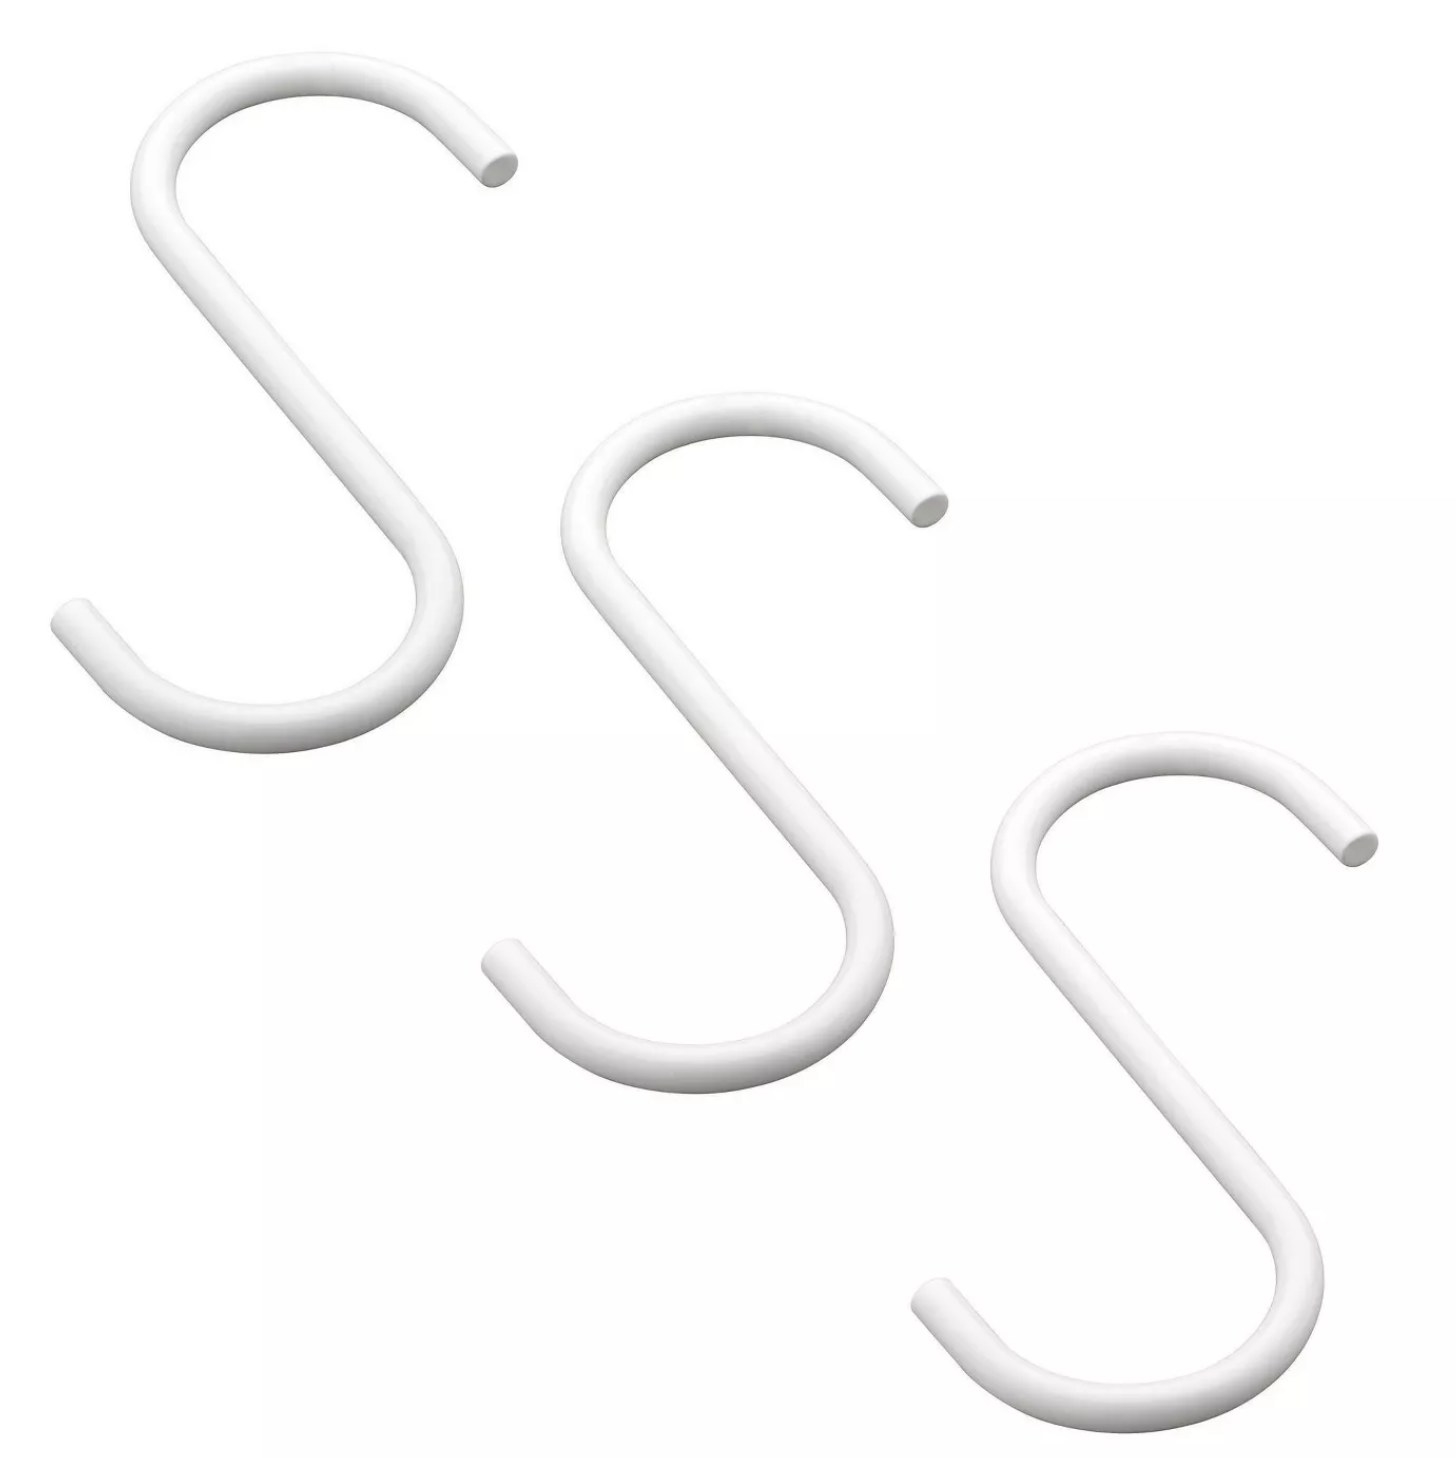 A set of three s-hooks on a white background